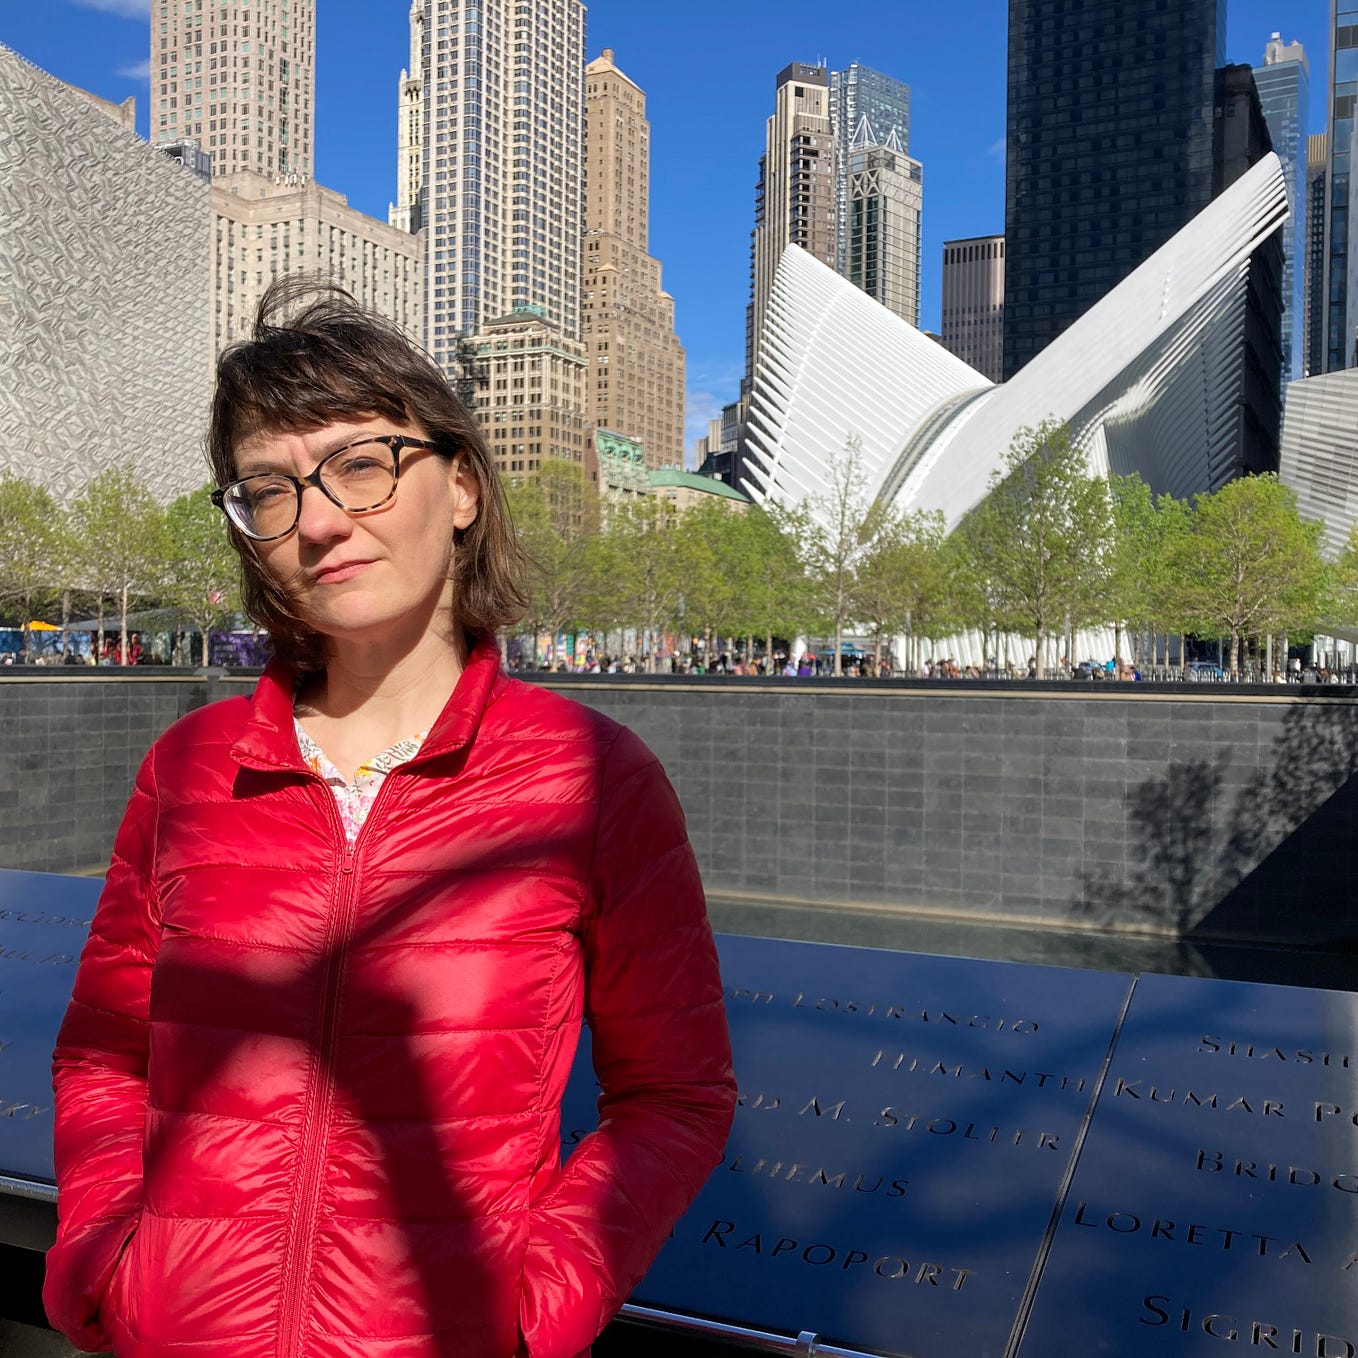 Photo of the author in a red jacket, standing in front of the 9/11 Memorial